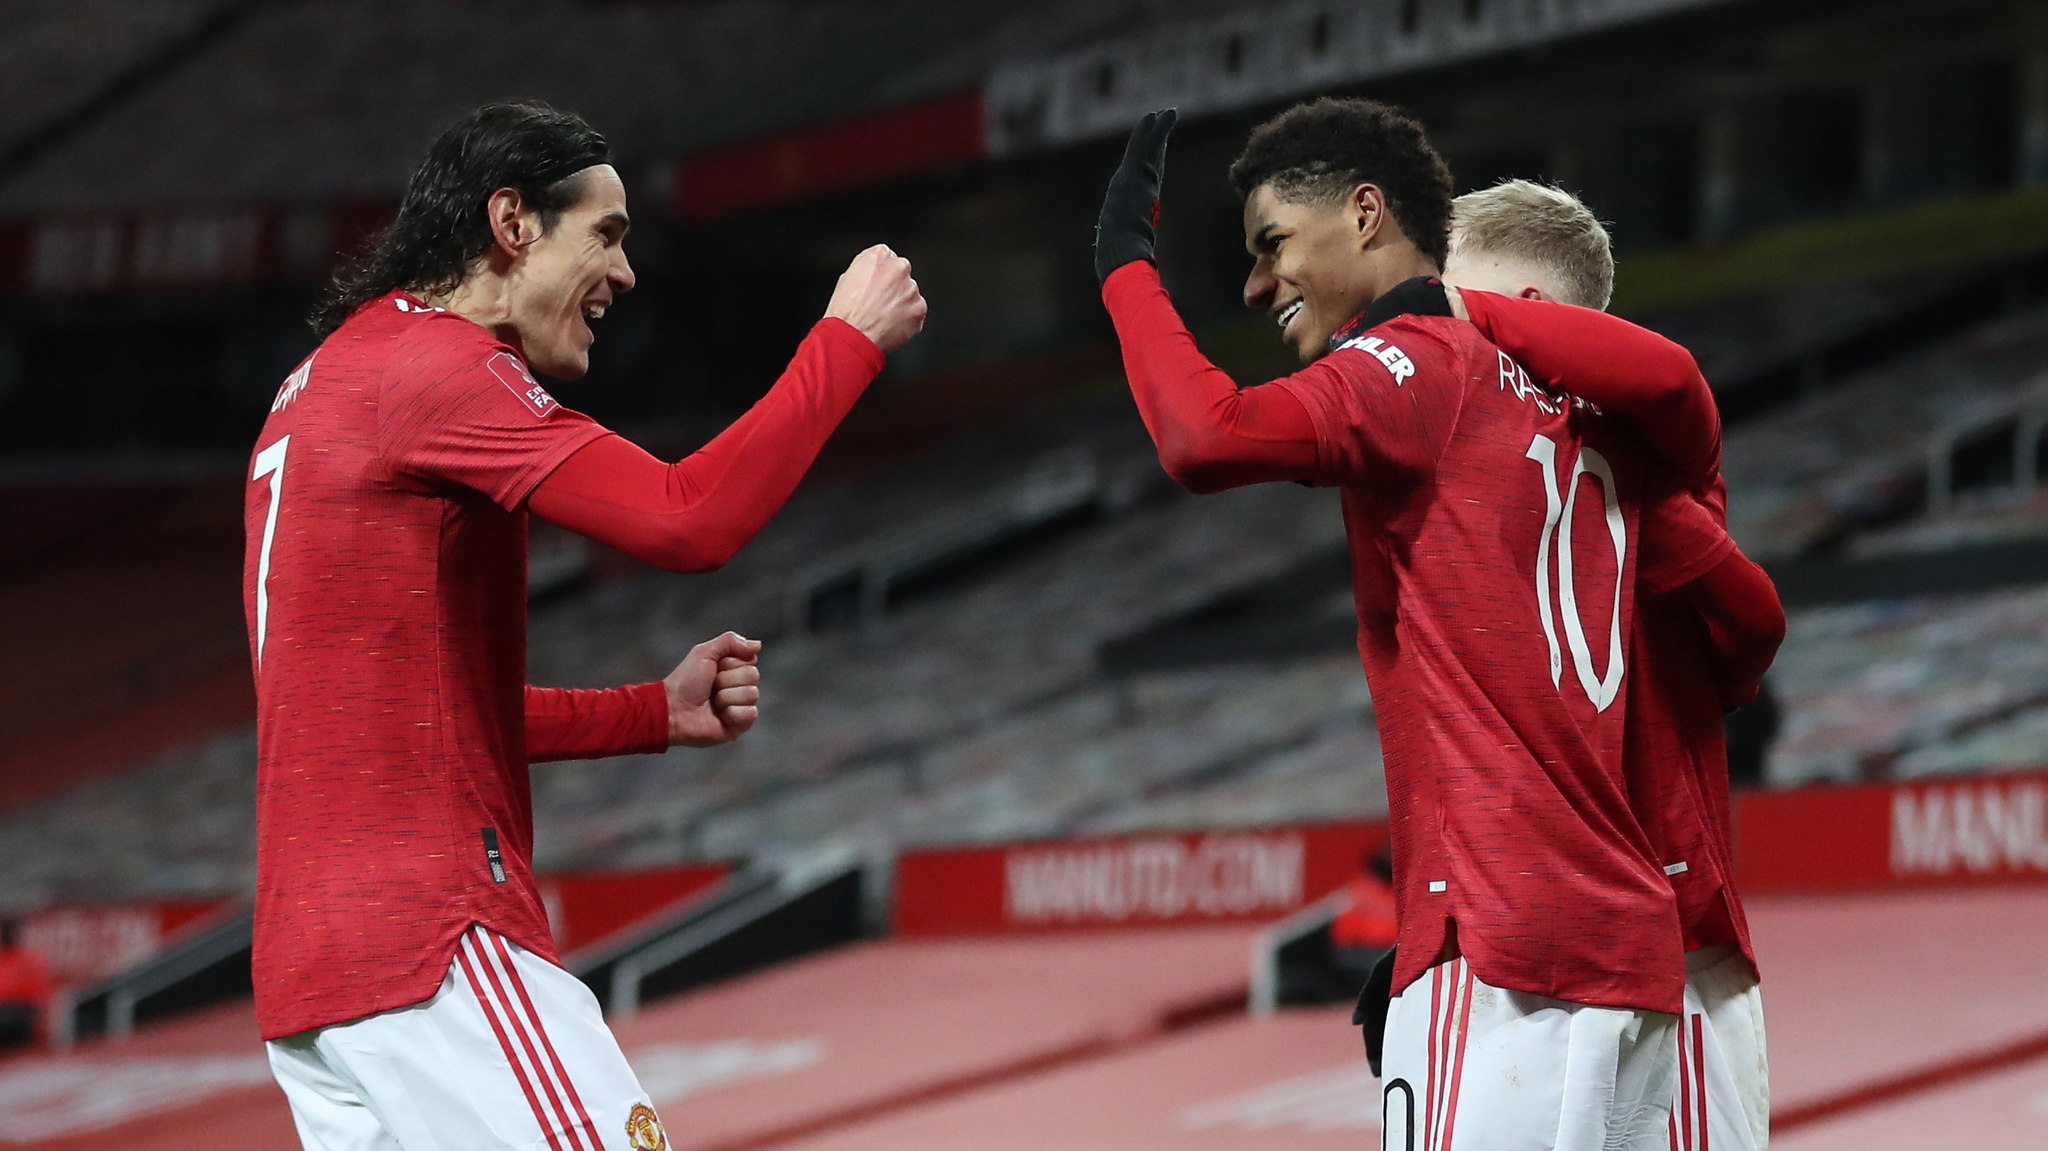 Manchester (United Kingdom), 24/01/2021.- Marcus lt;HIT gt;Rashford lt;/HIT gt; (C) of Manchester United celebrates with teammates after scoring the 2-1 lead during the English FA Cup fourth round soccer match between Manchester United and Liverpool in Manchester, Britain, 24 January 2021. (Reino Unido) EFE/EPA/Martin Rickett / POOL EDITORIAL USE ONLY. No use with unauthorized audio, video, data, fixture lists, club/league logos or 'live' services. Online in-match use limited to 120 images, no video emulation. No use in betting, games or single club/league/player publications